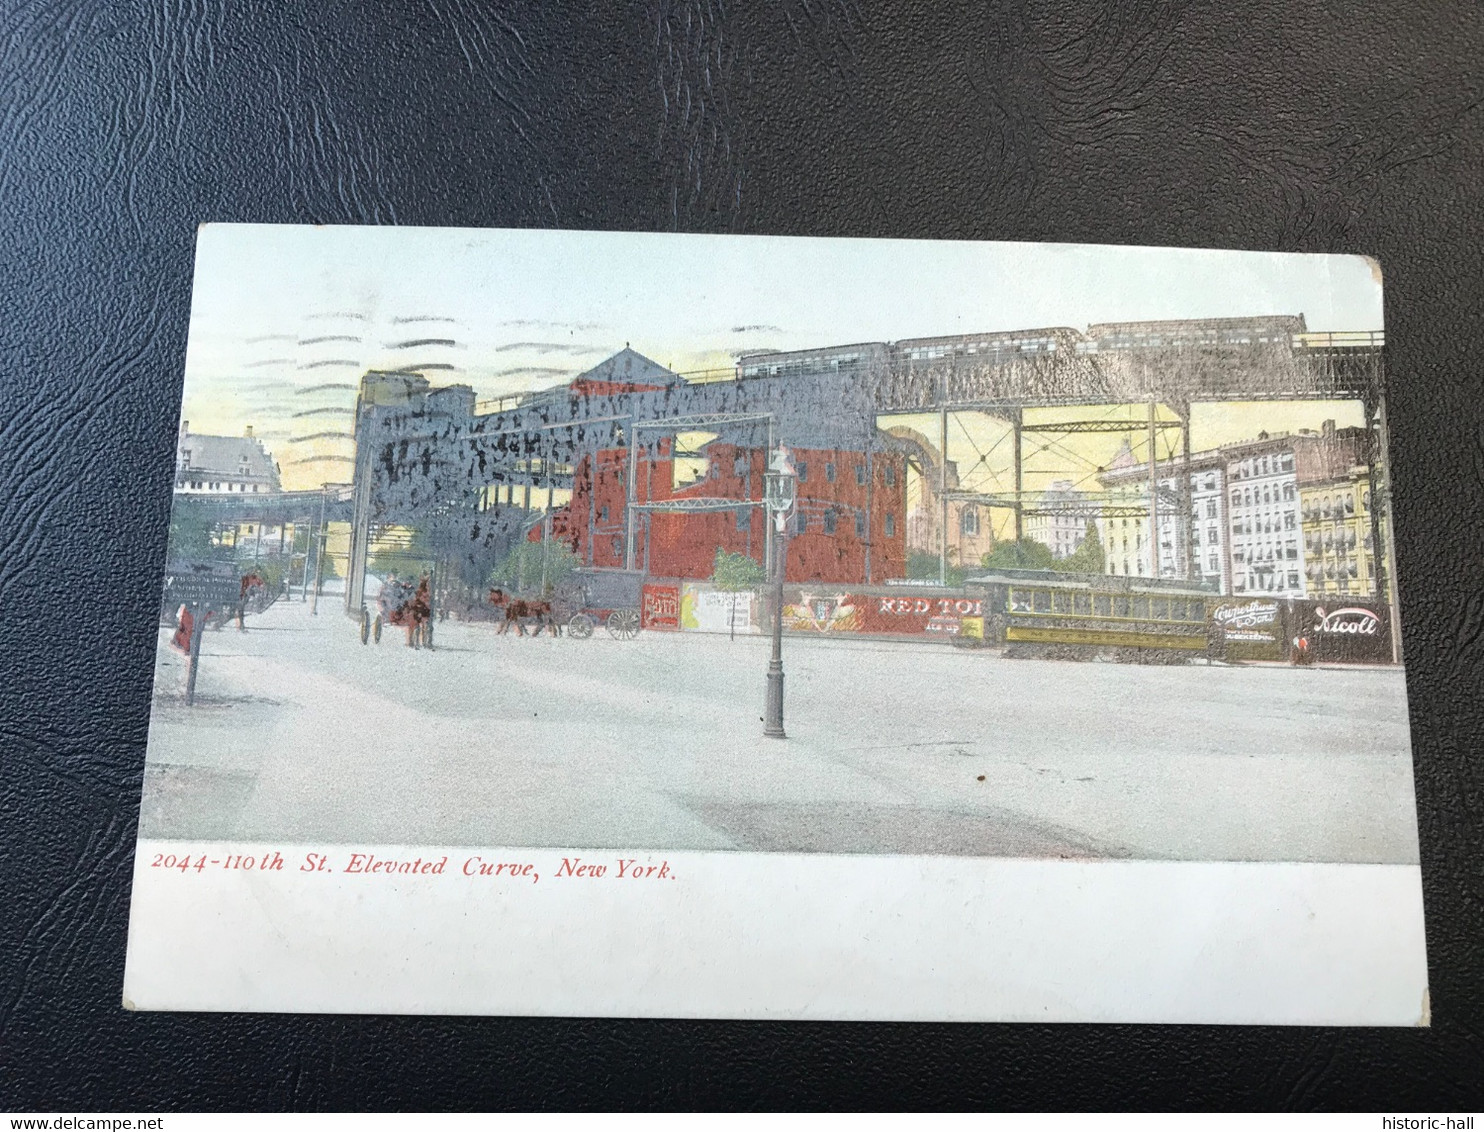 2044 - 110th  St. Elevated Curve, New York - 1906 - Transport